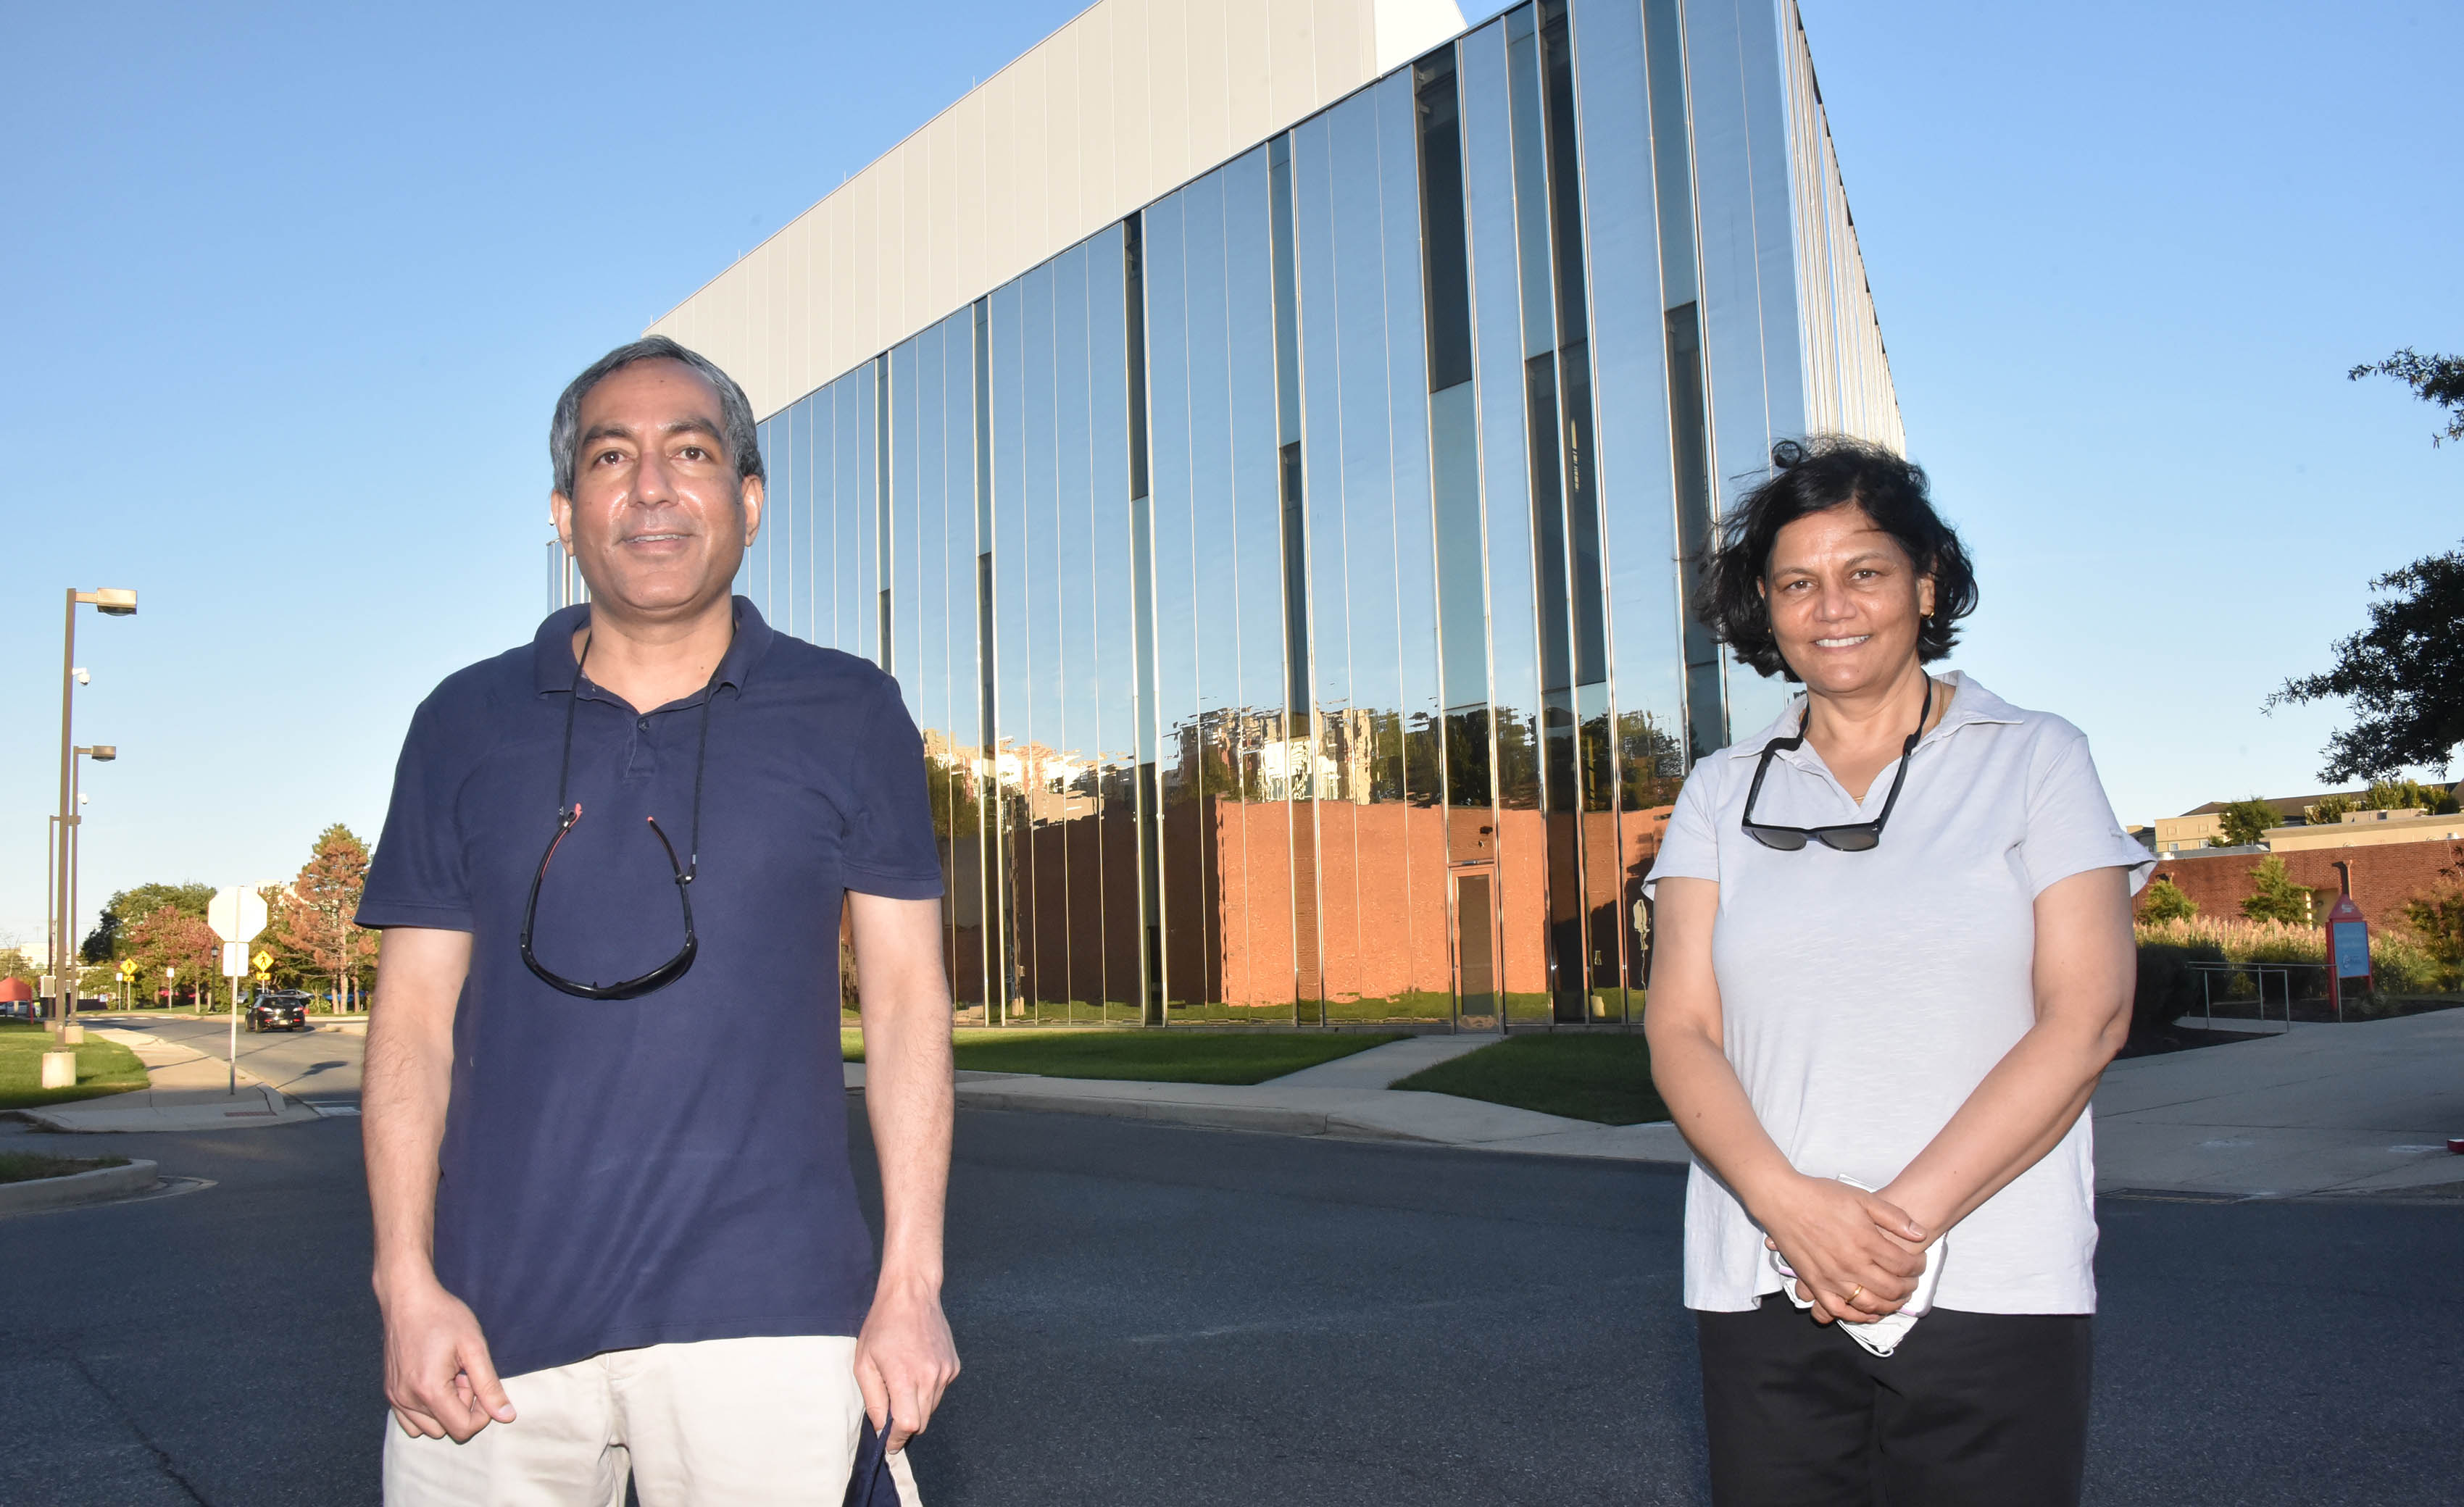 Drs. Gour Pati and Renu Tripathi are the co-directors of a new DoD Center of Excellence in Advance Quantum Sensing at the University, funded by a five-year $7.5 million Department of Defense grant. Not pictured are co-principal investigators are Dr. Deborah Santamore, Dr. Jun Ren, as well as Dr. Matthew Bobrowski, who is a senior key personnel member on the project.